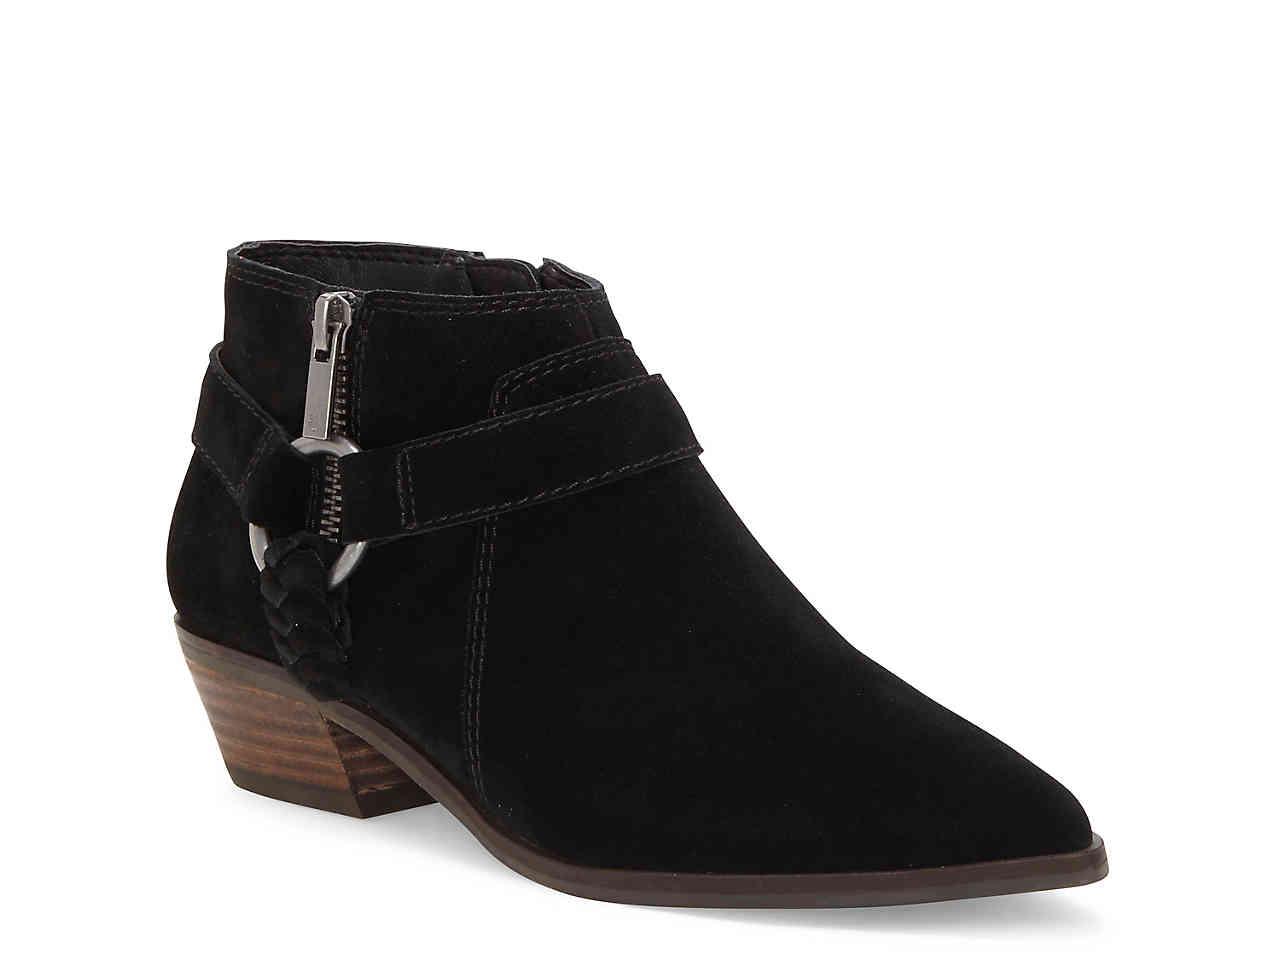 Lucky Brand Enitha Bootie in Black Suede (Black) - Save 8% - Lyst